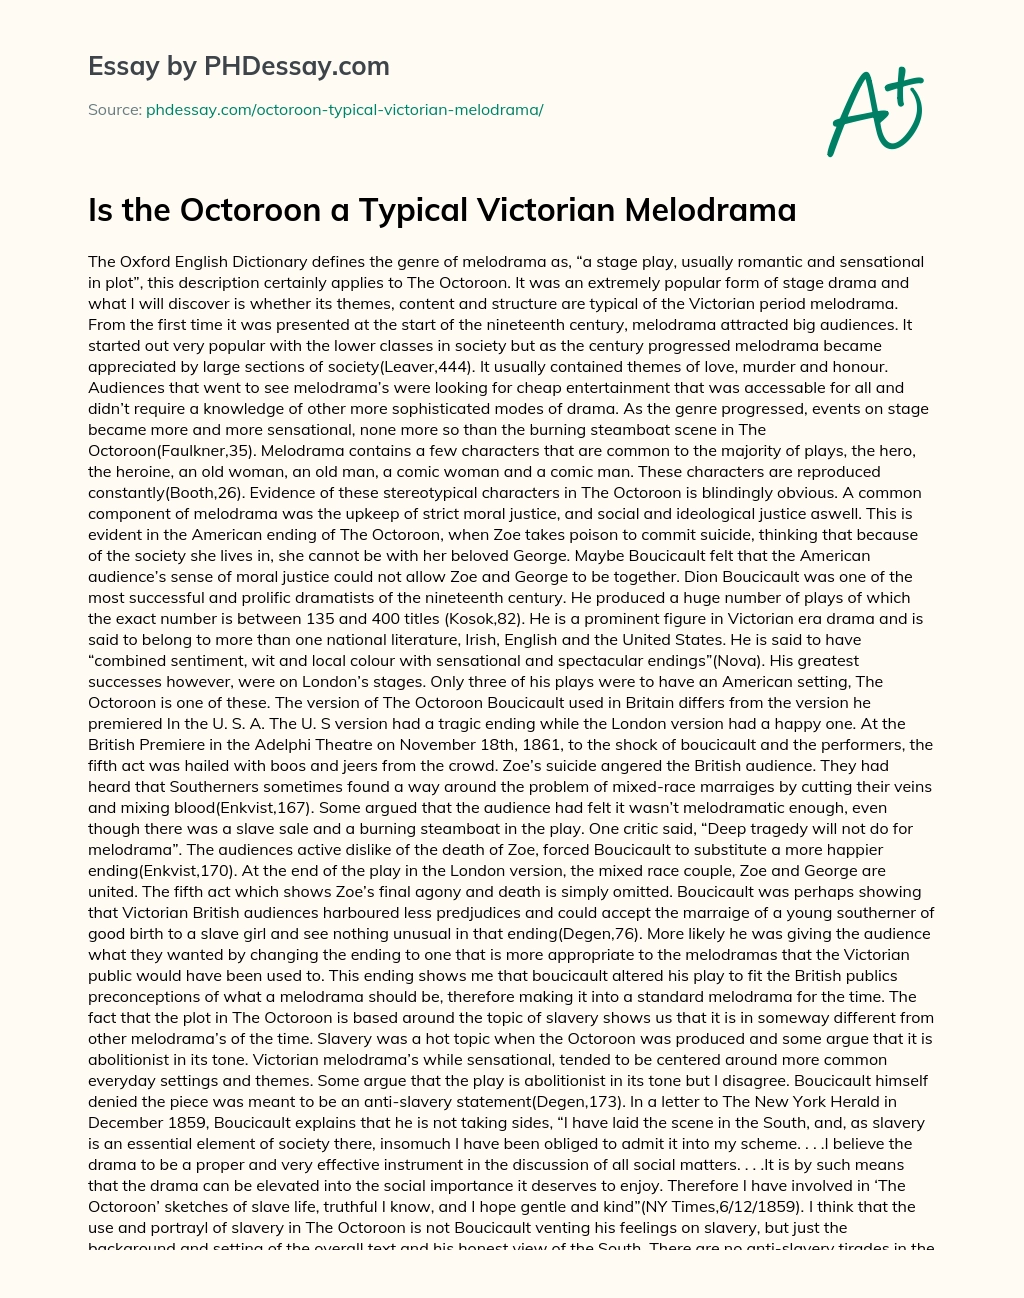 Is the Octoroon a Typical Victorian Melodrama essay